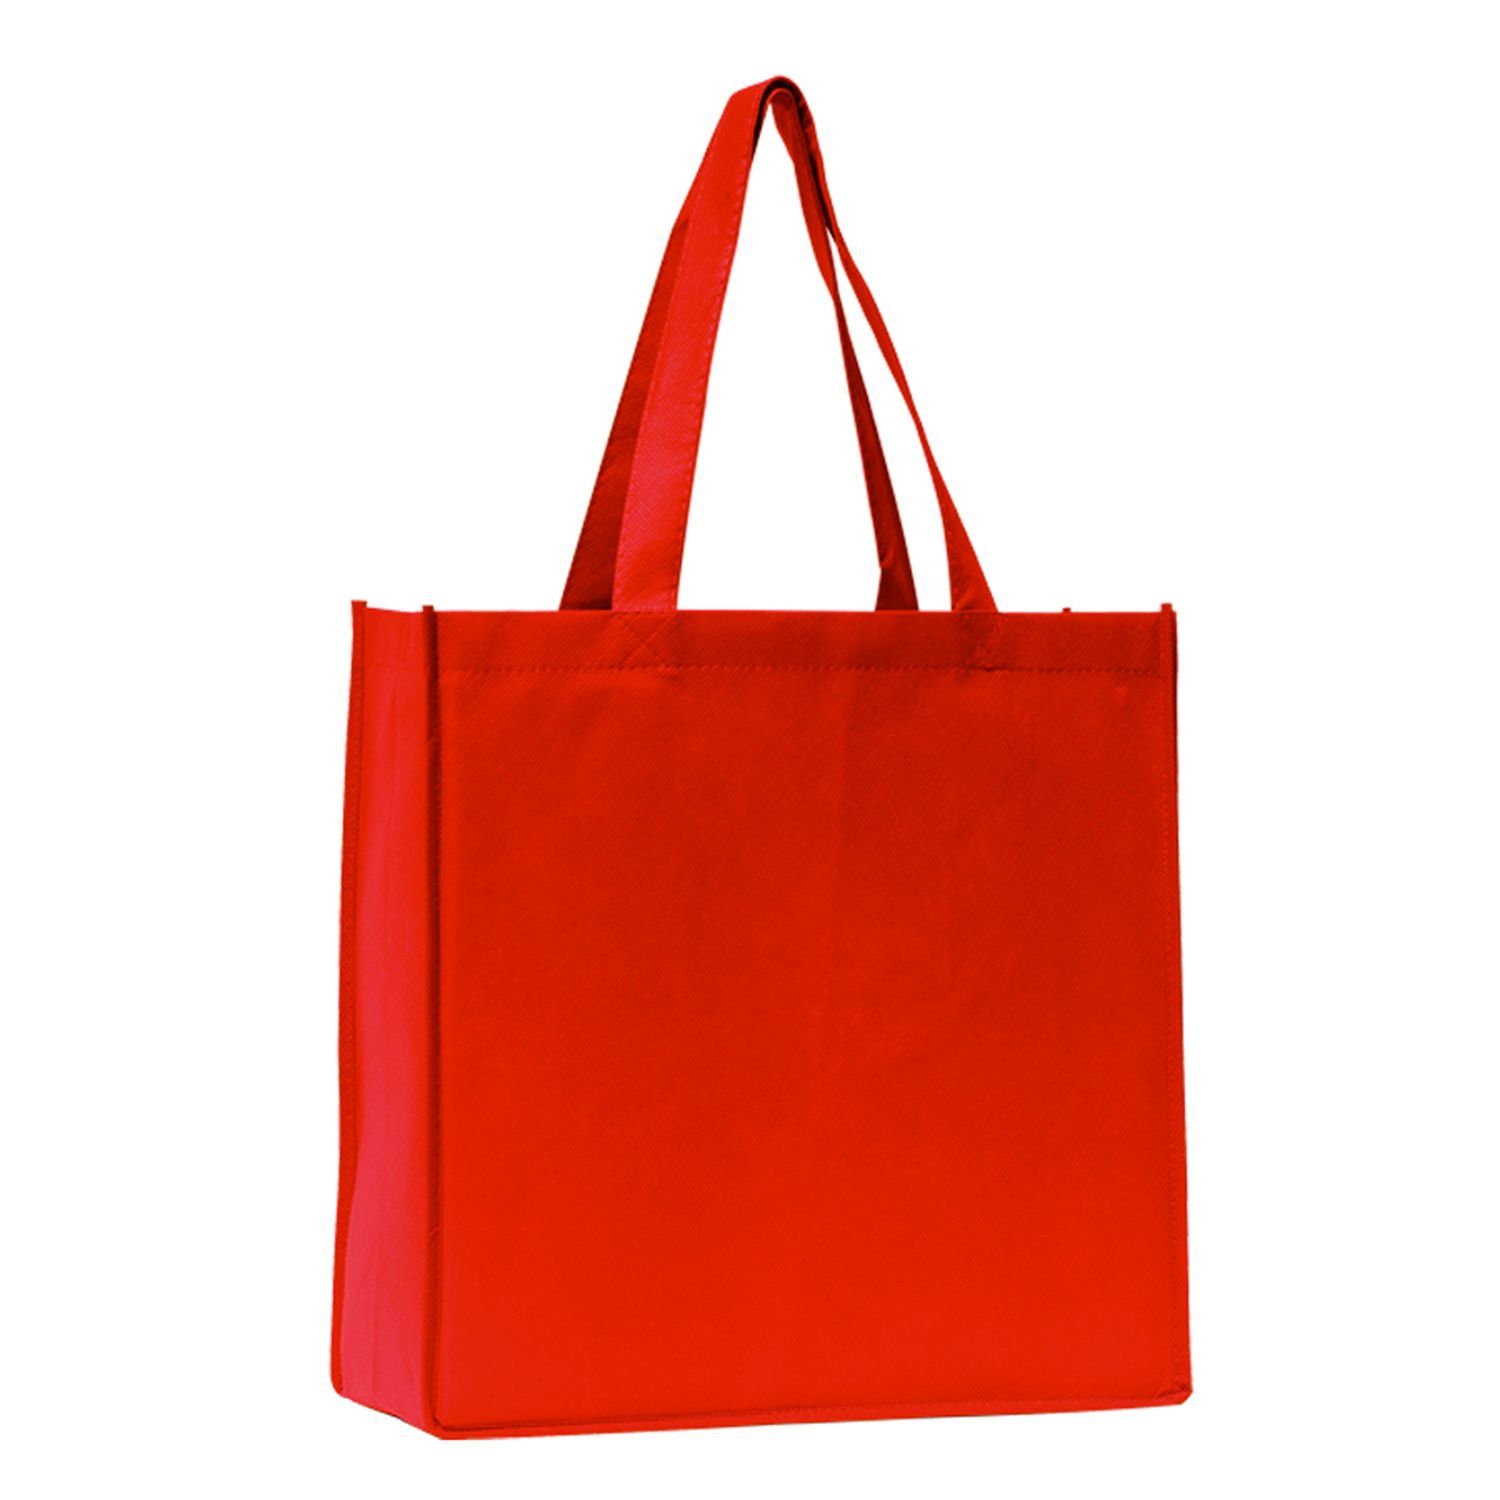 13 X 13 X 5 Polytex Tote | The Magnet Group